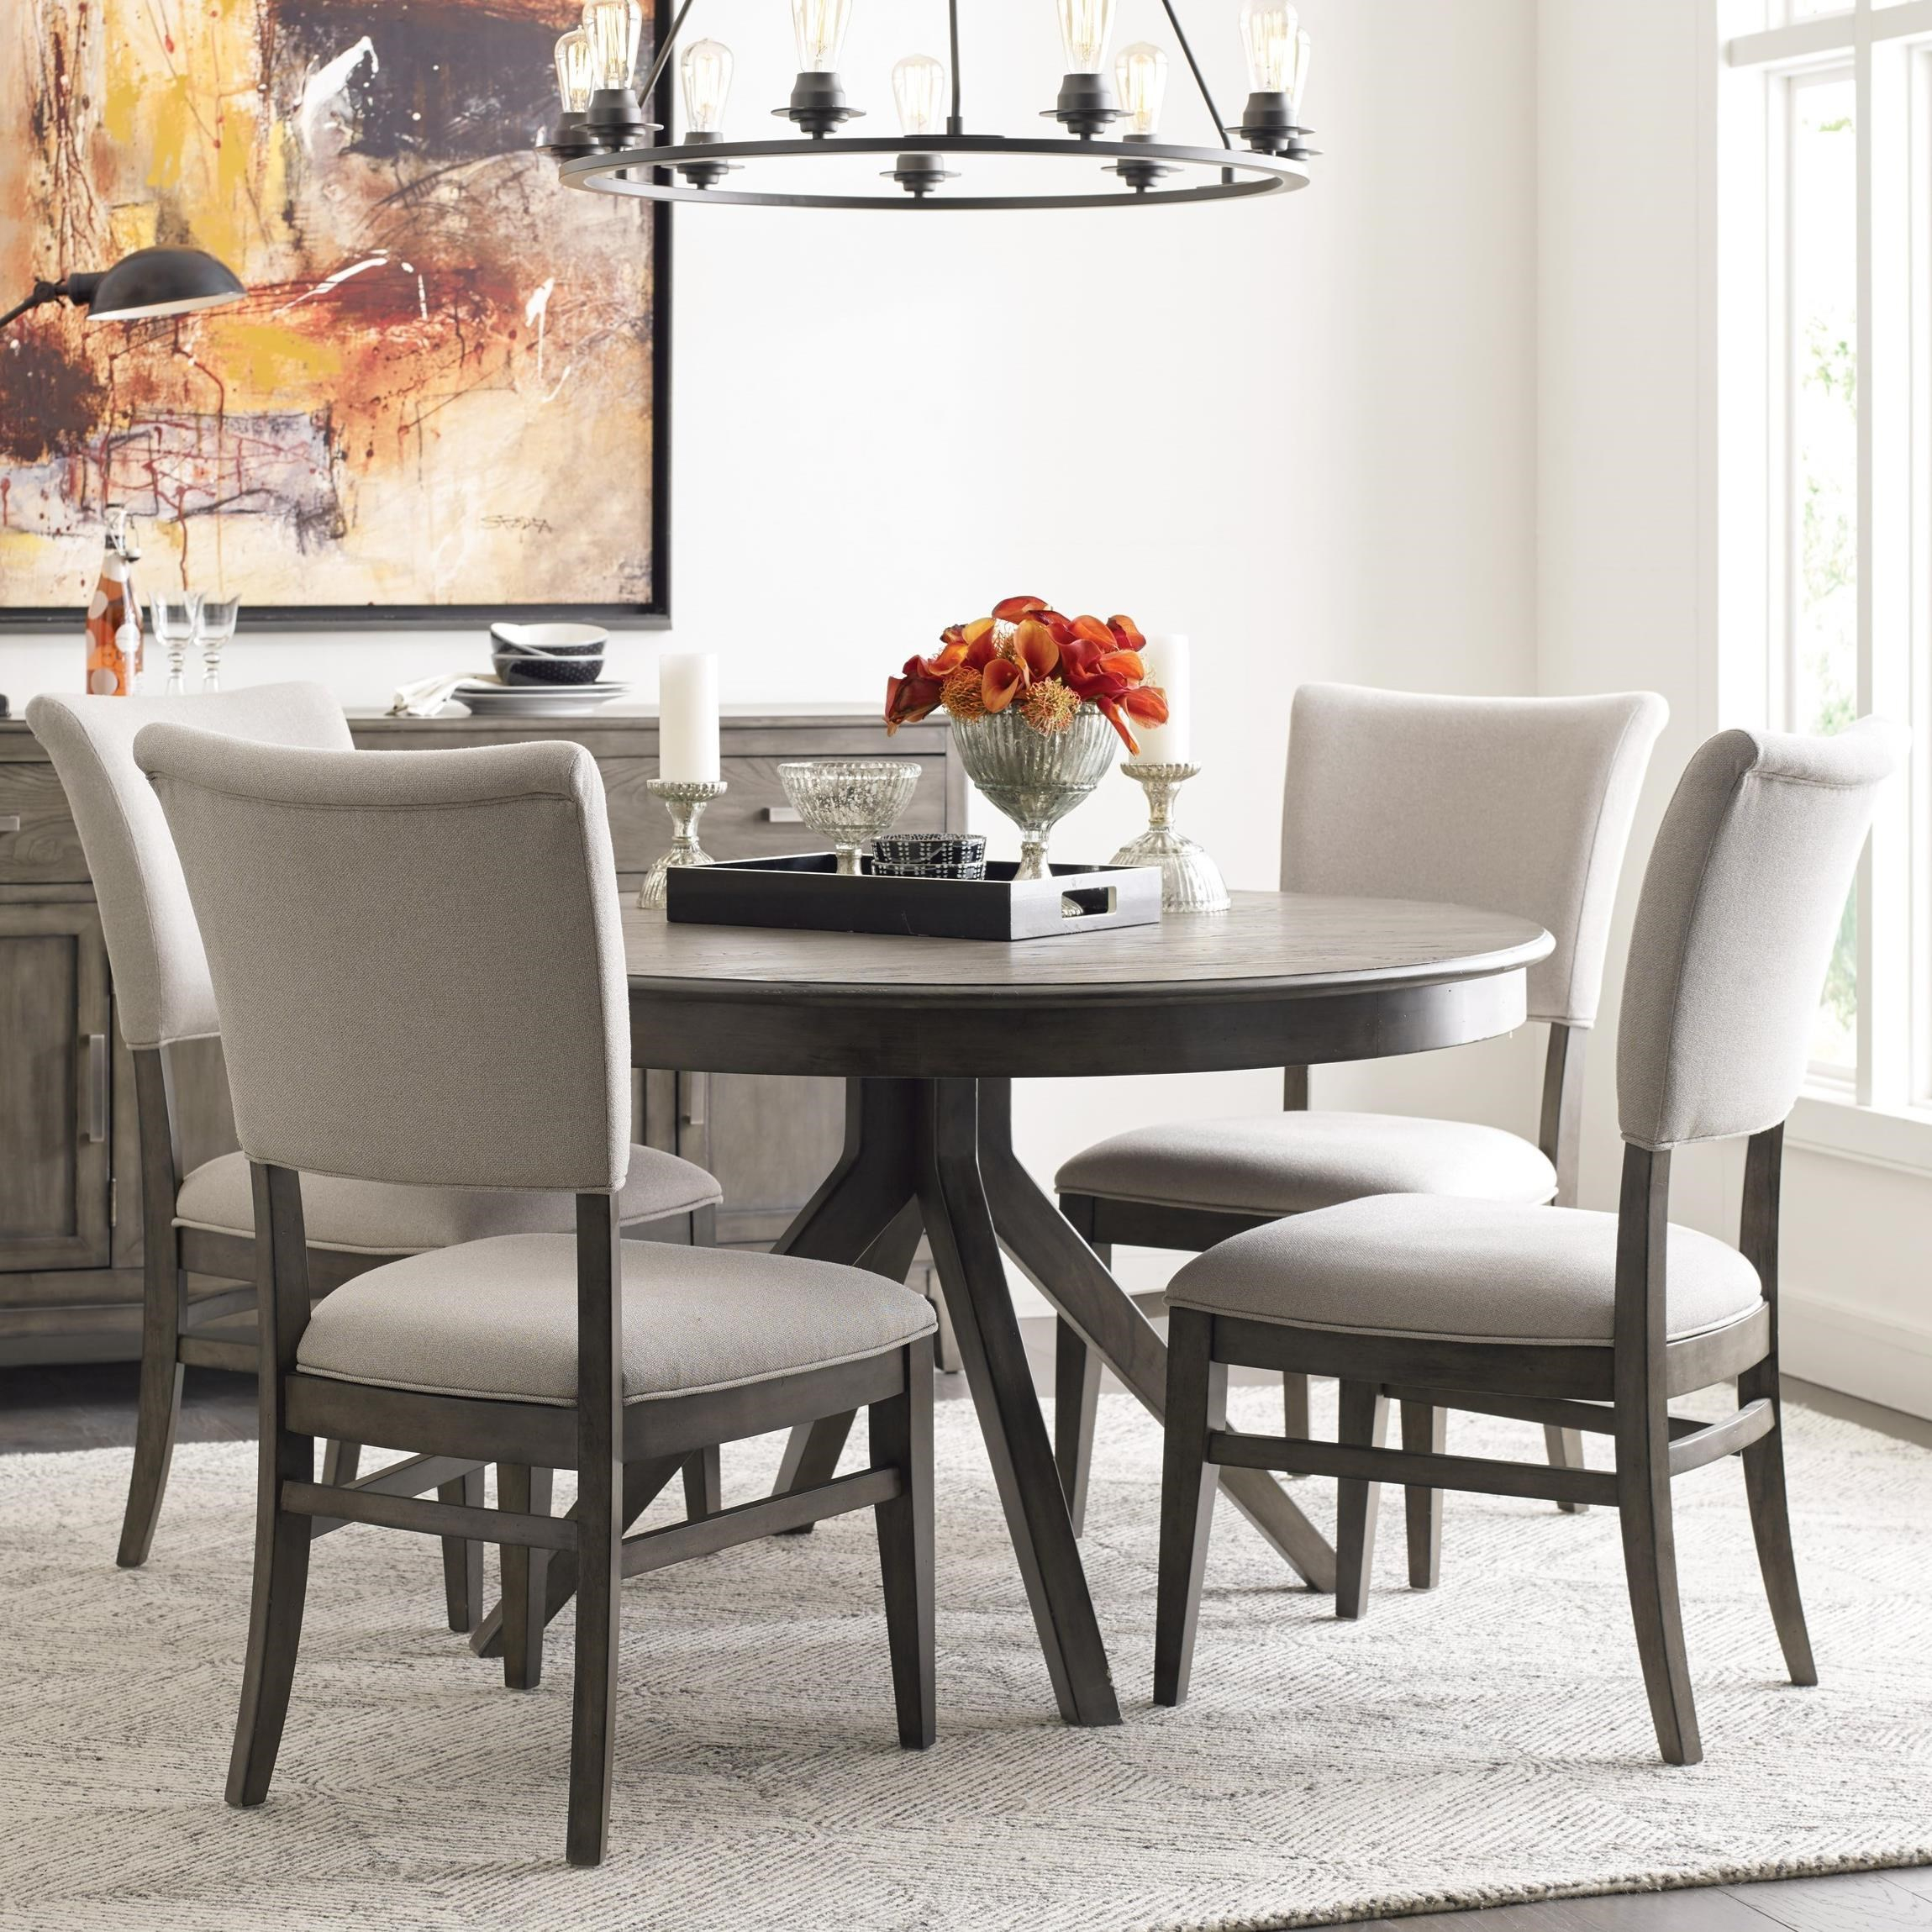 Kincaid Furniture Cascade Round Dining Table Set With 4 pertaining to measurements 2299 X 2299